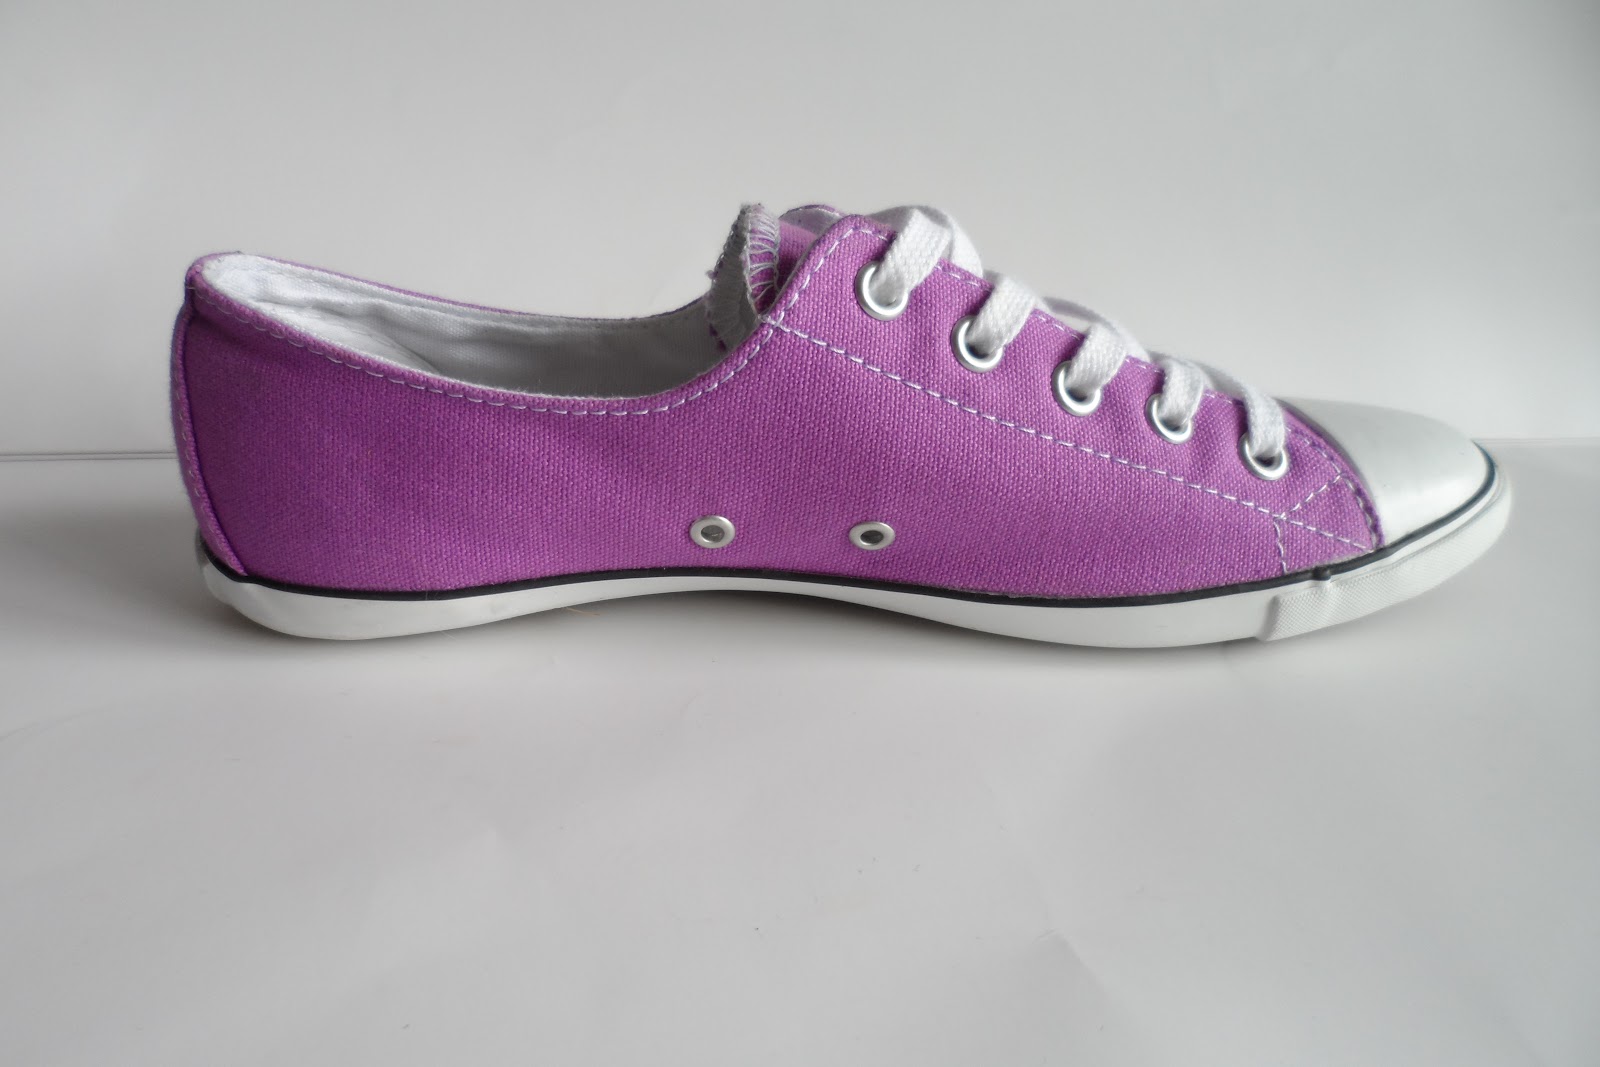 A sneaky schneeekers purchase - Converse All Star lite in lilac ...